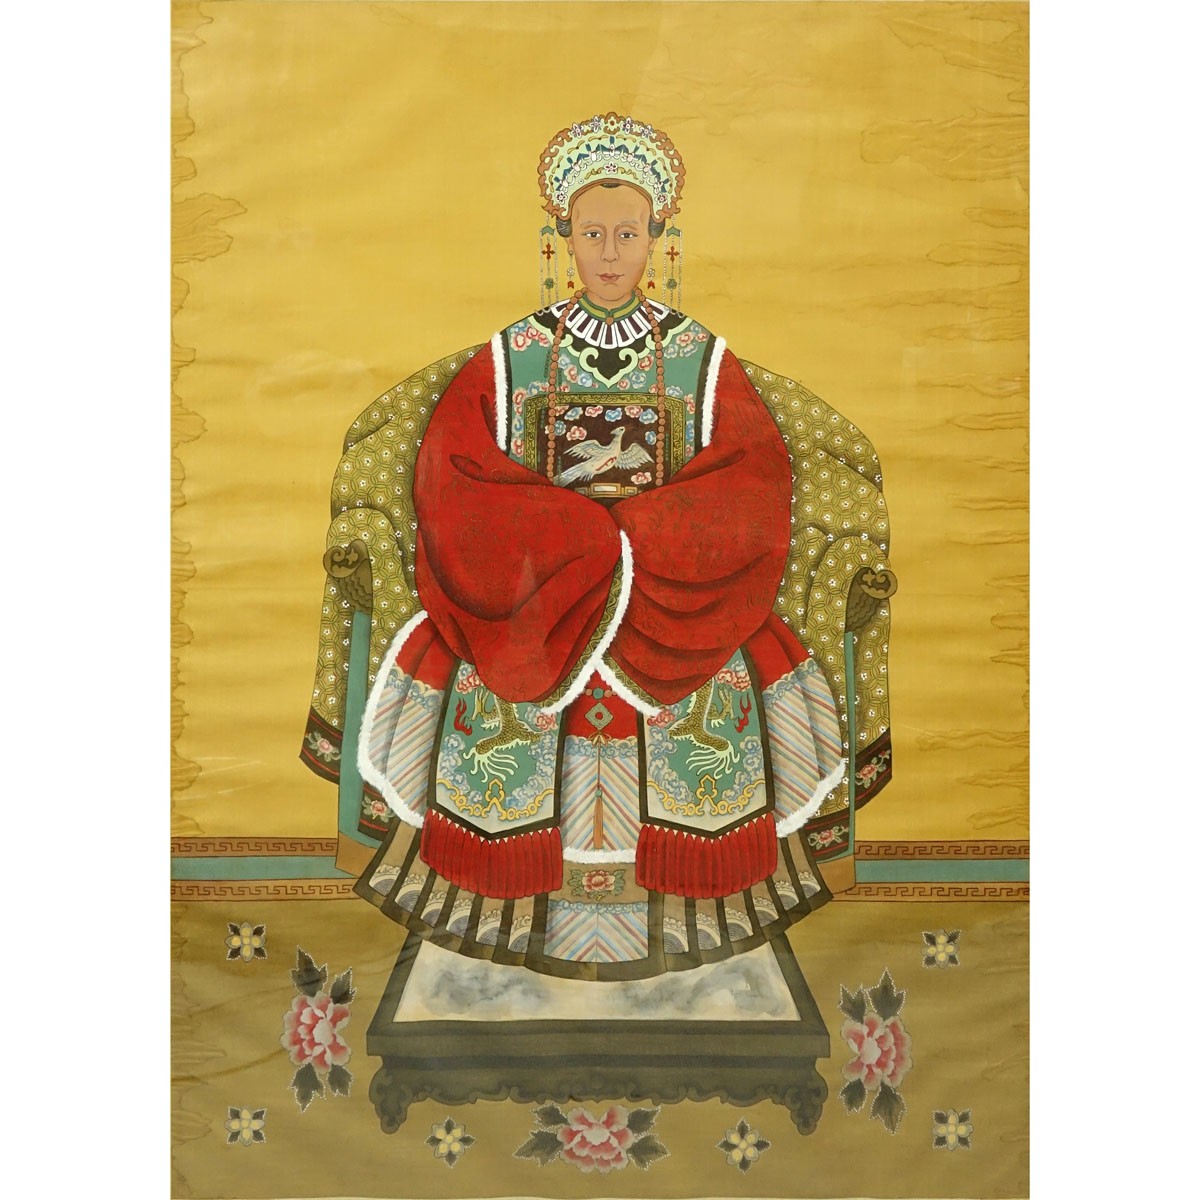 Large Antique Chinese Qing Dynasty Style Watercolor on Silk Scroll Painting, Seated Empress. Water stains to border otherwise good condition.